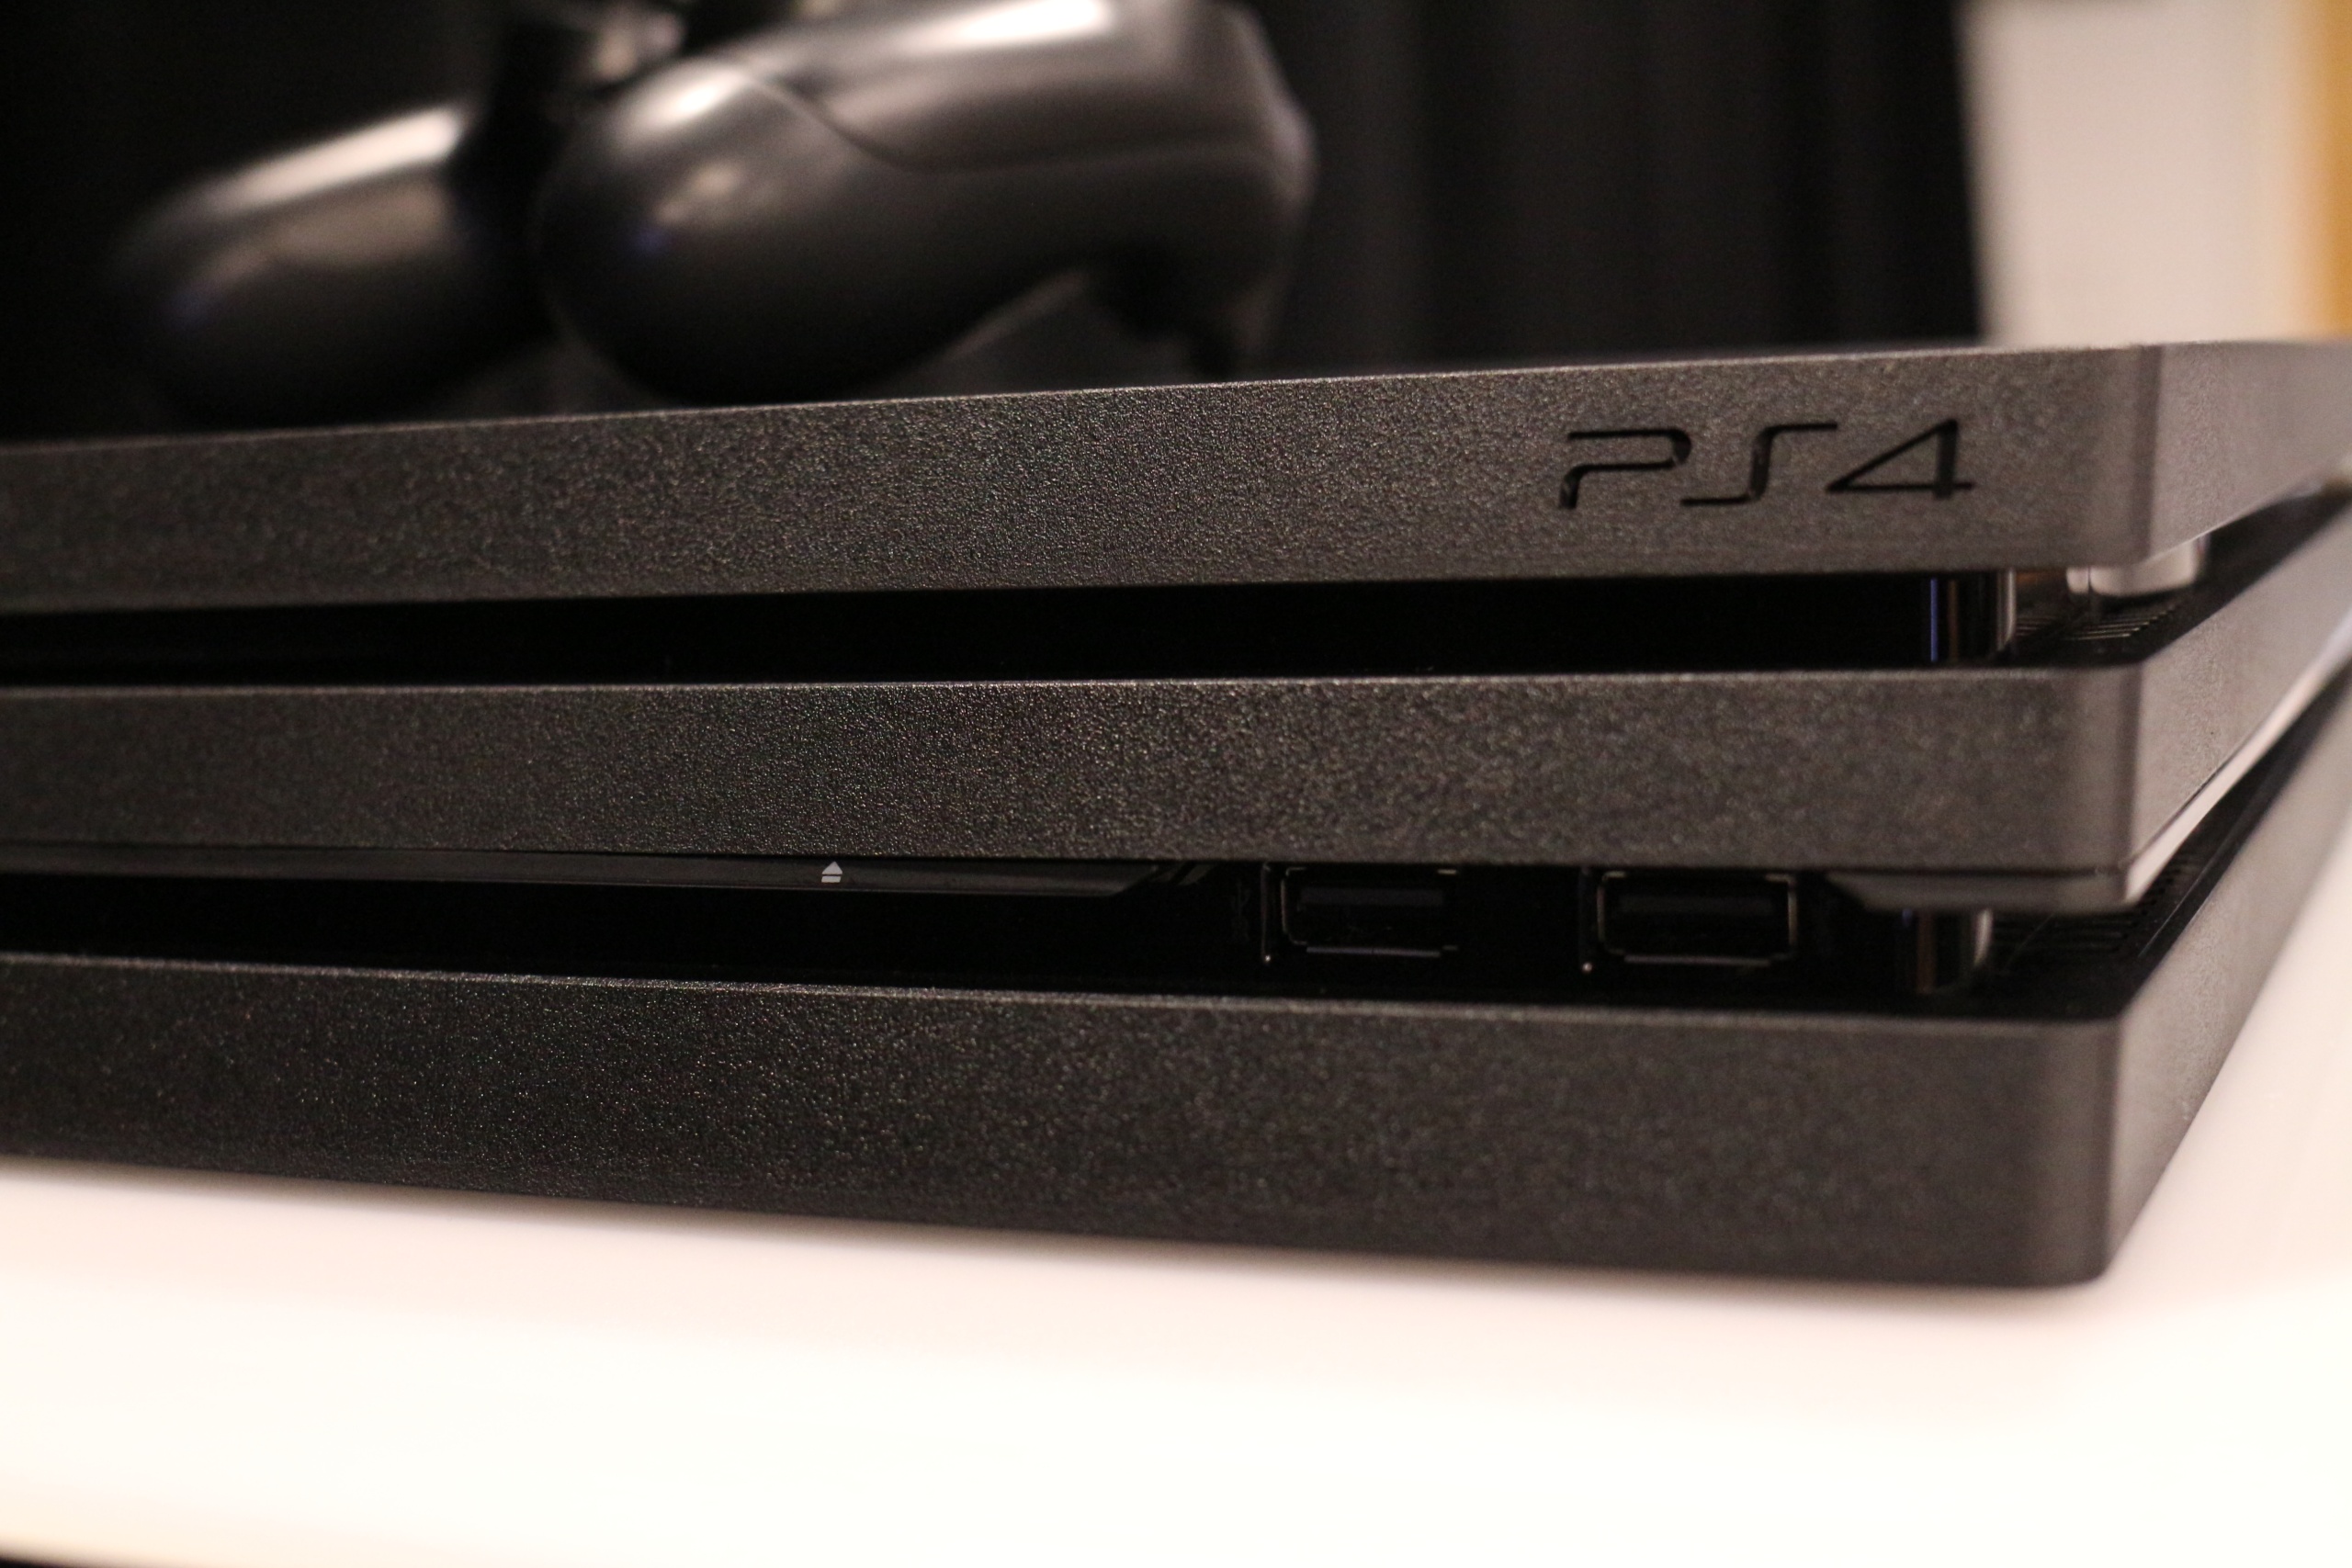 Sony PlayStation 4 Pro review: Should you buy a PS4 Pro? It's ...